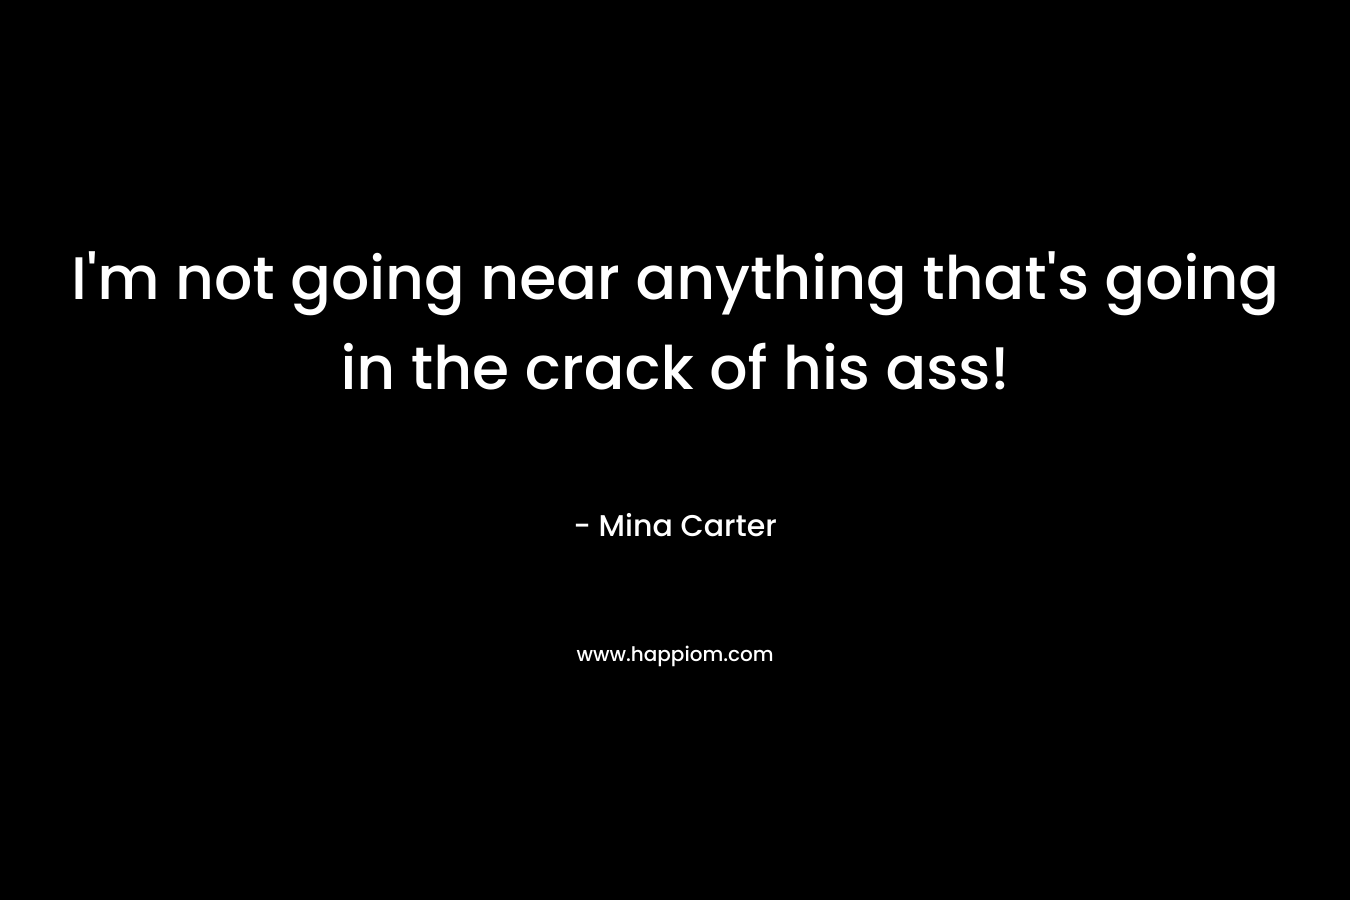 I’m not going near anything that’s going in the crack of his ass! – Mina Carter